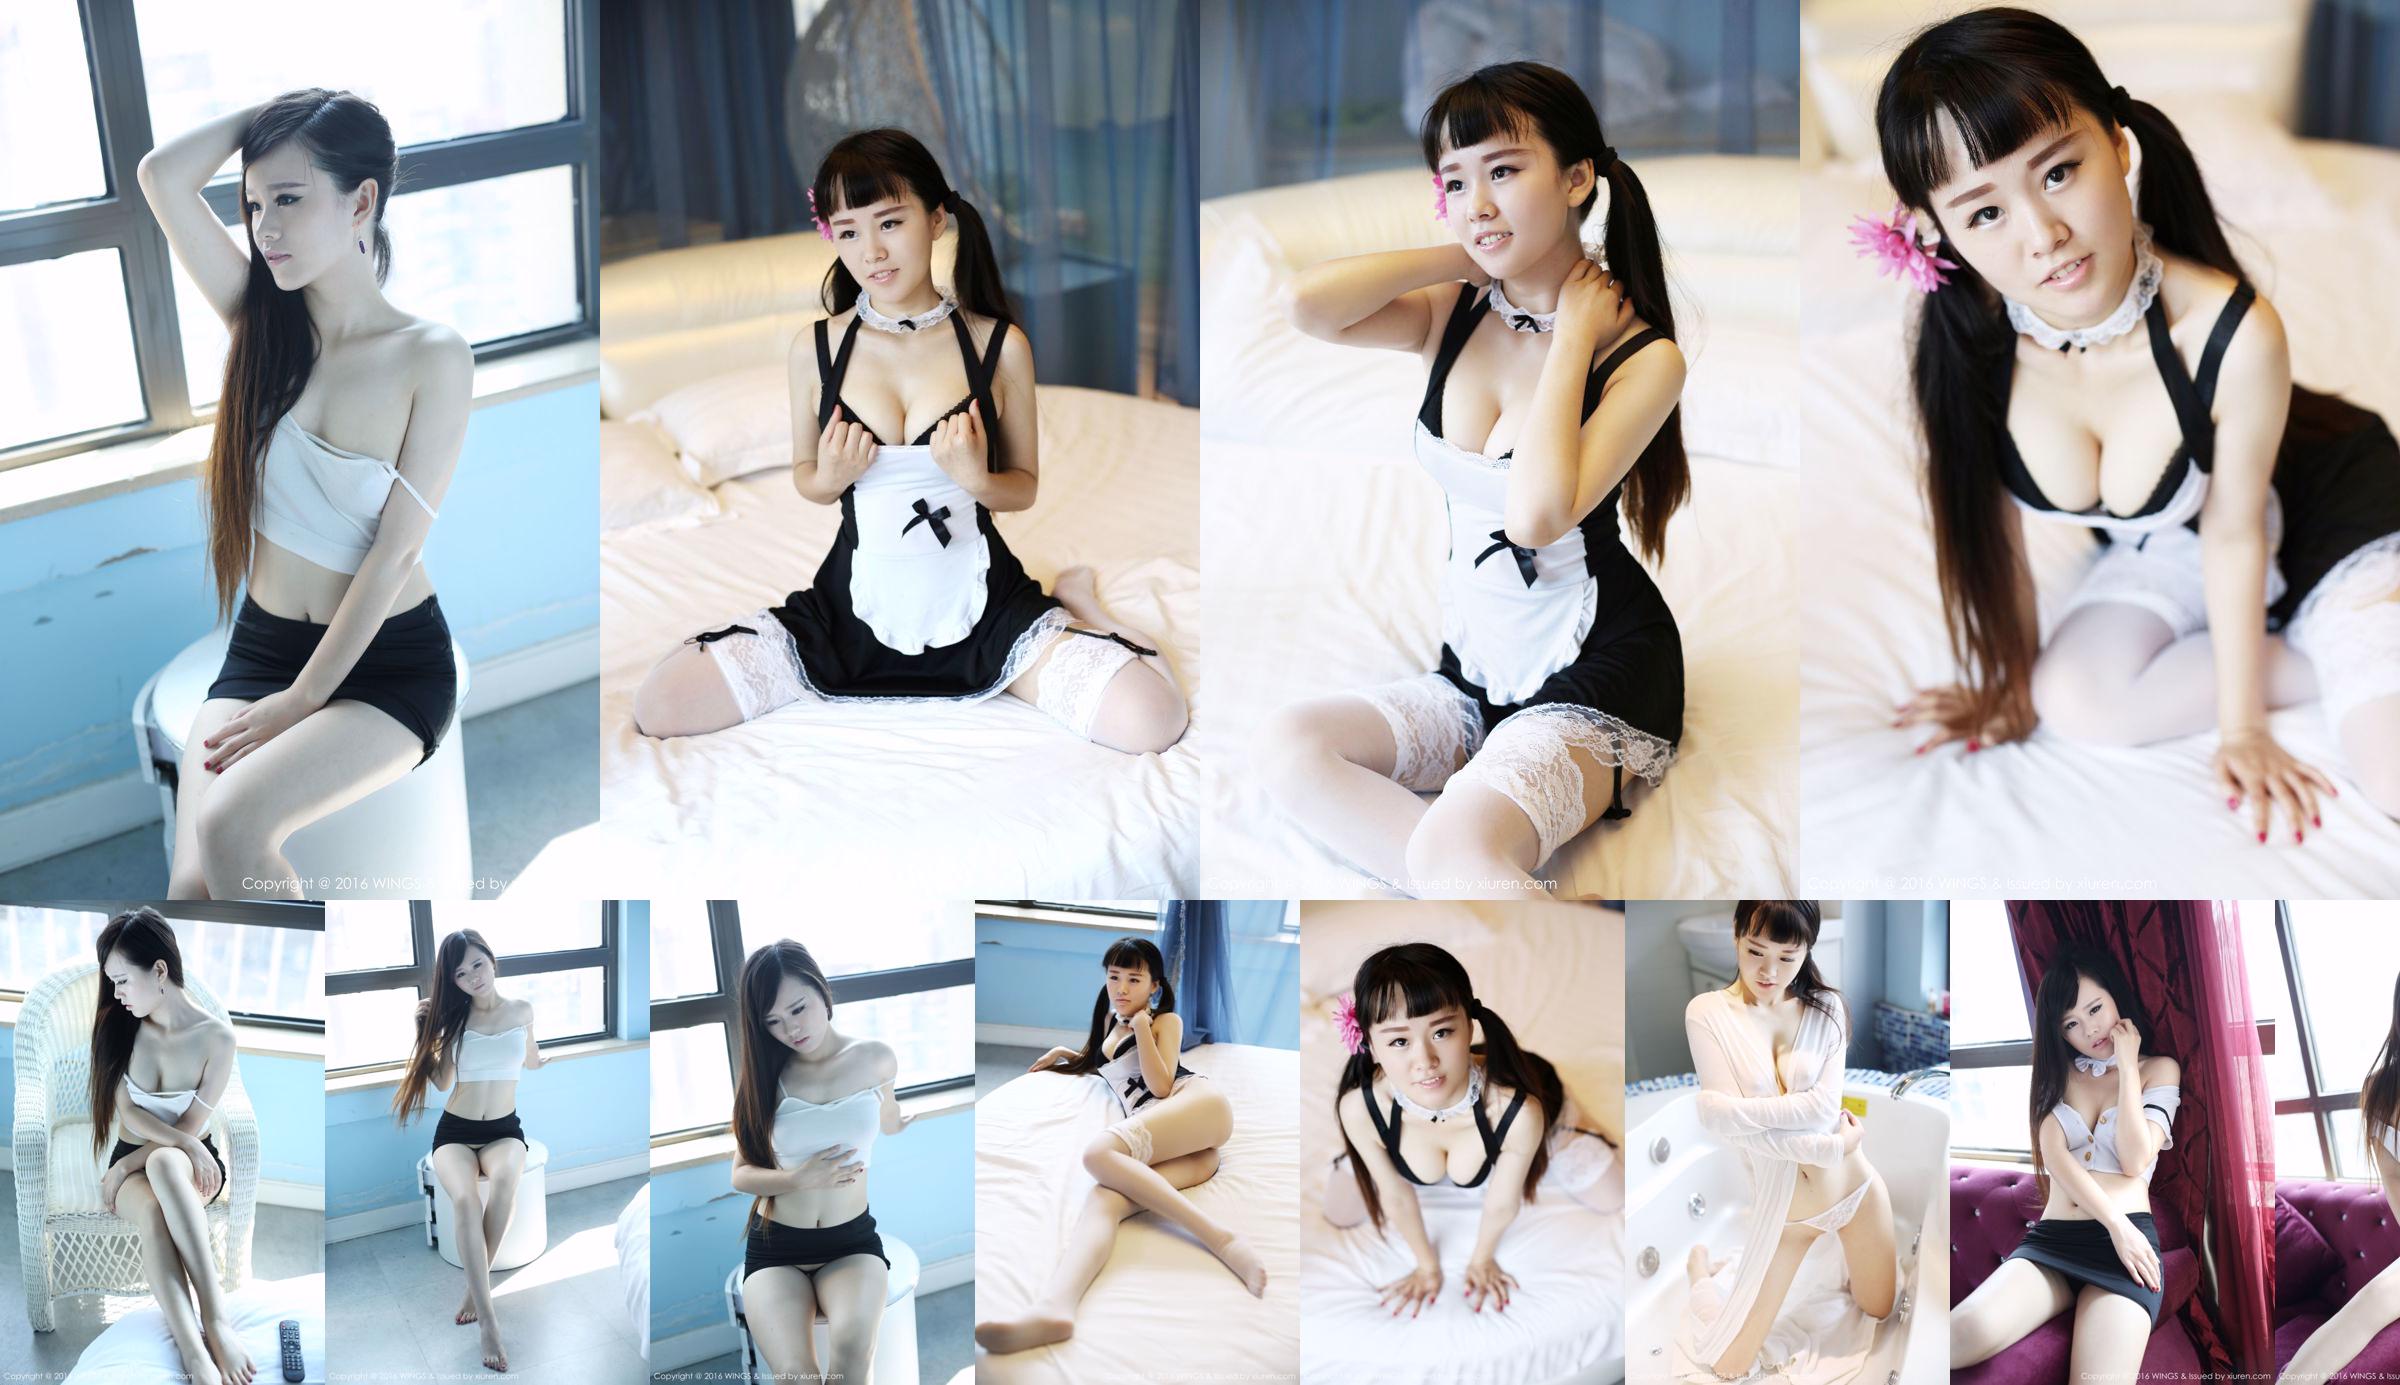 Meow Meow Cyan "Lace Maid + Bathtub Temptation" [WingS影私荟] Vol.005 No.5ca144 Page 23